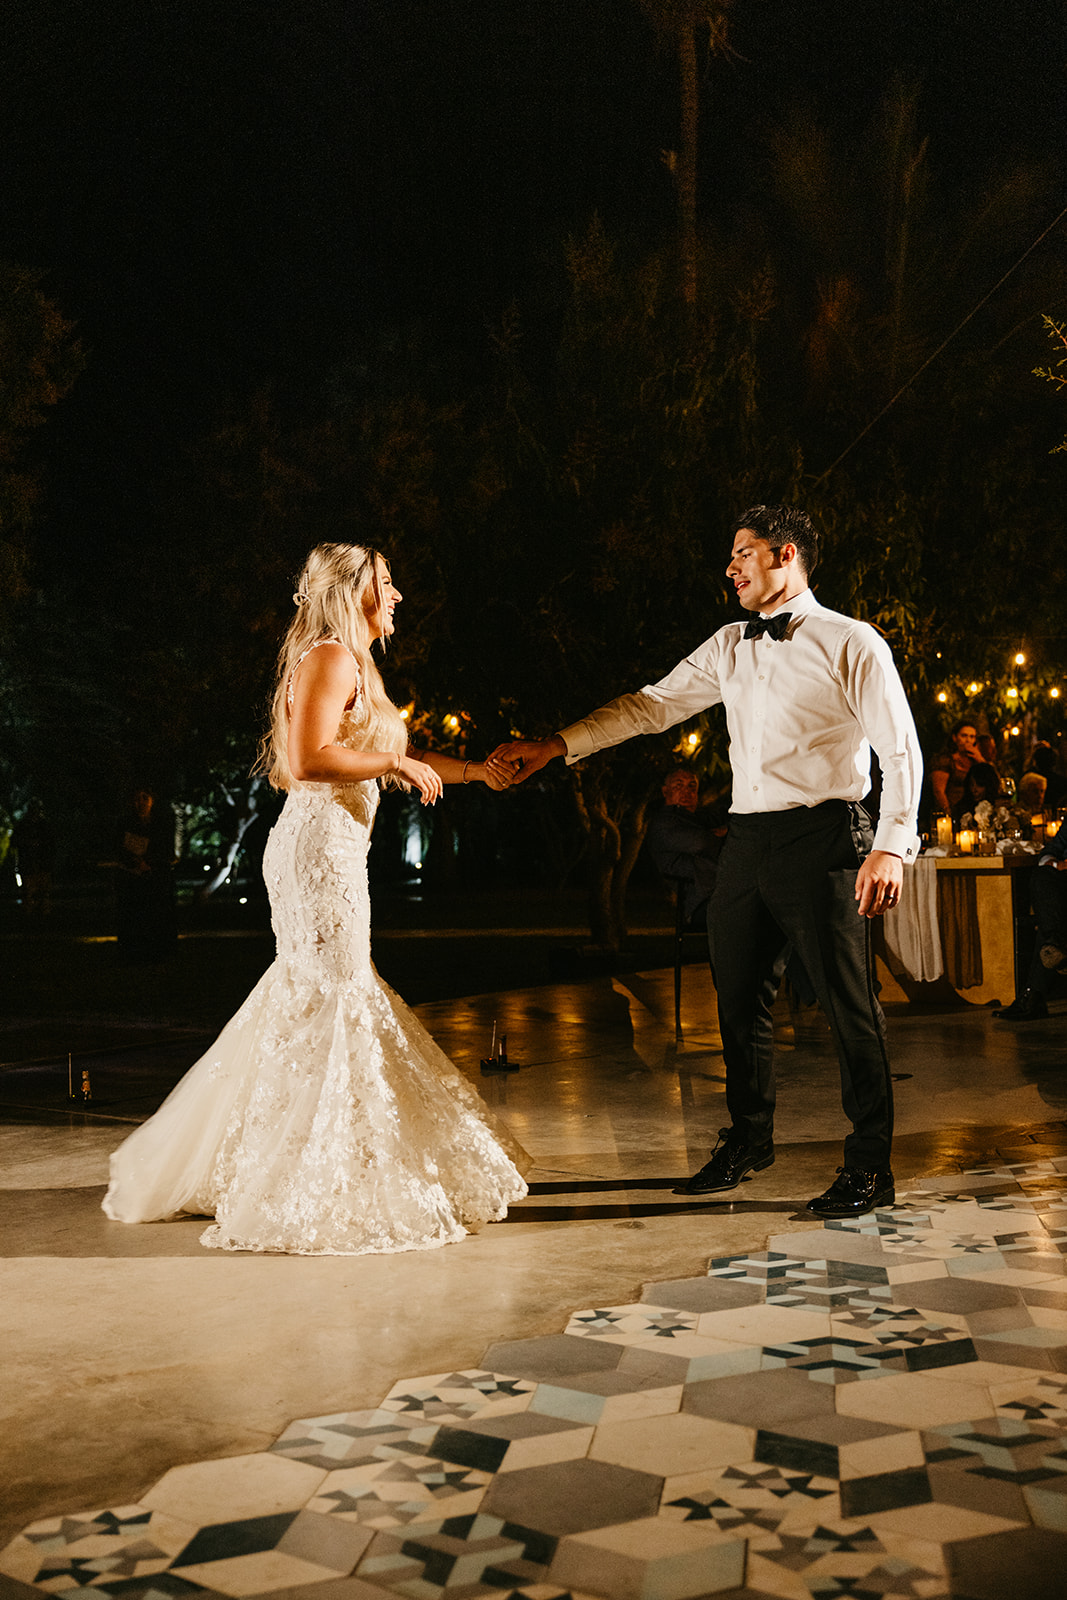 Bride and groom's first dance at their reception at Acre Resort Cabo